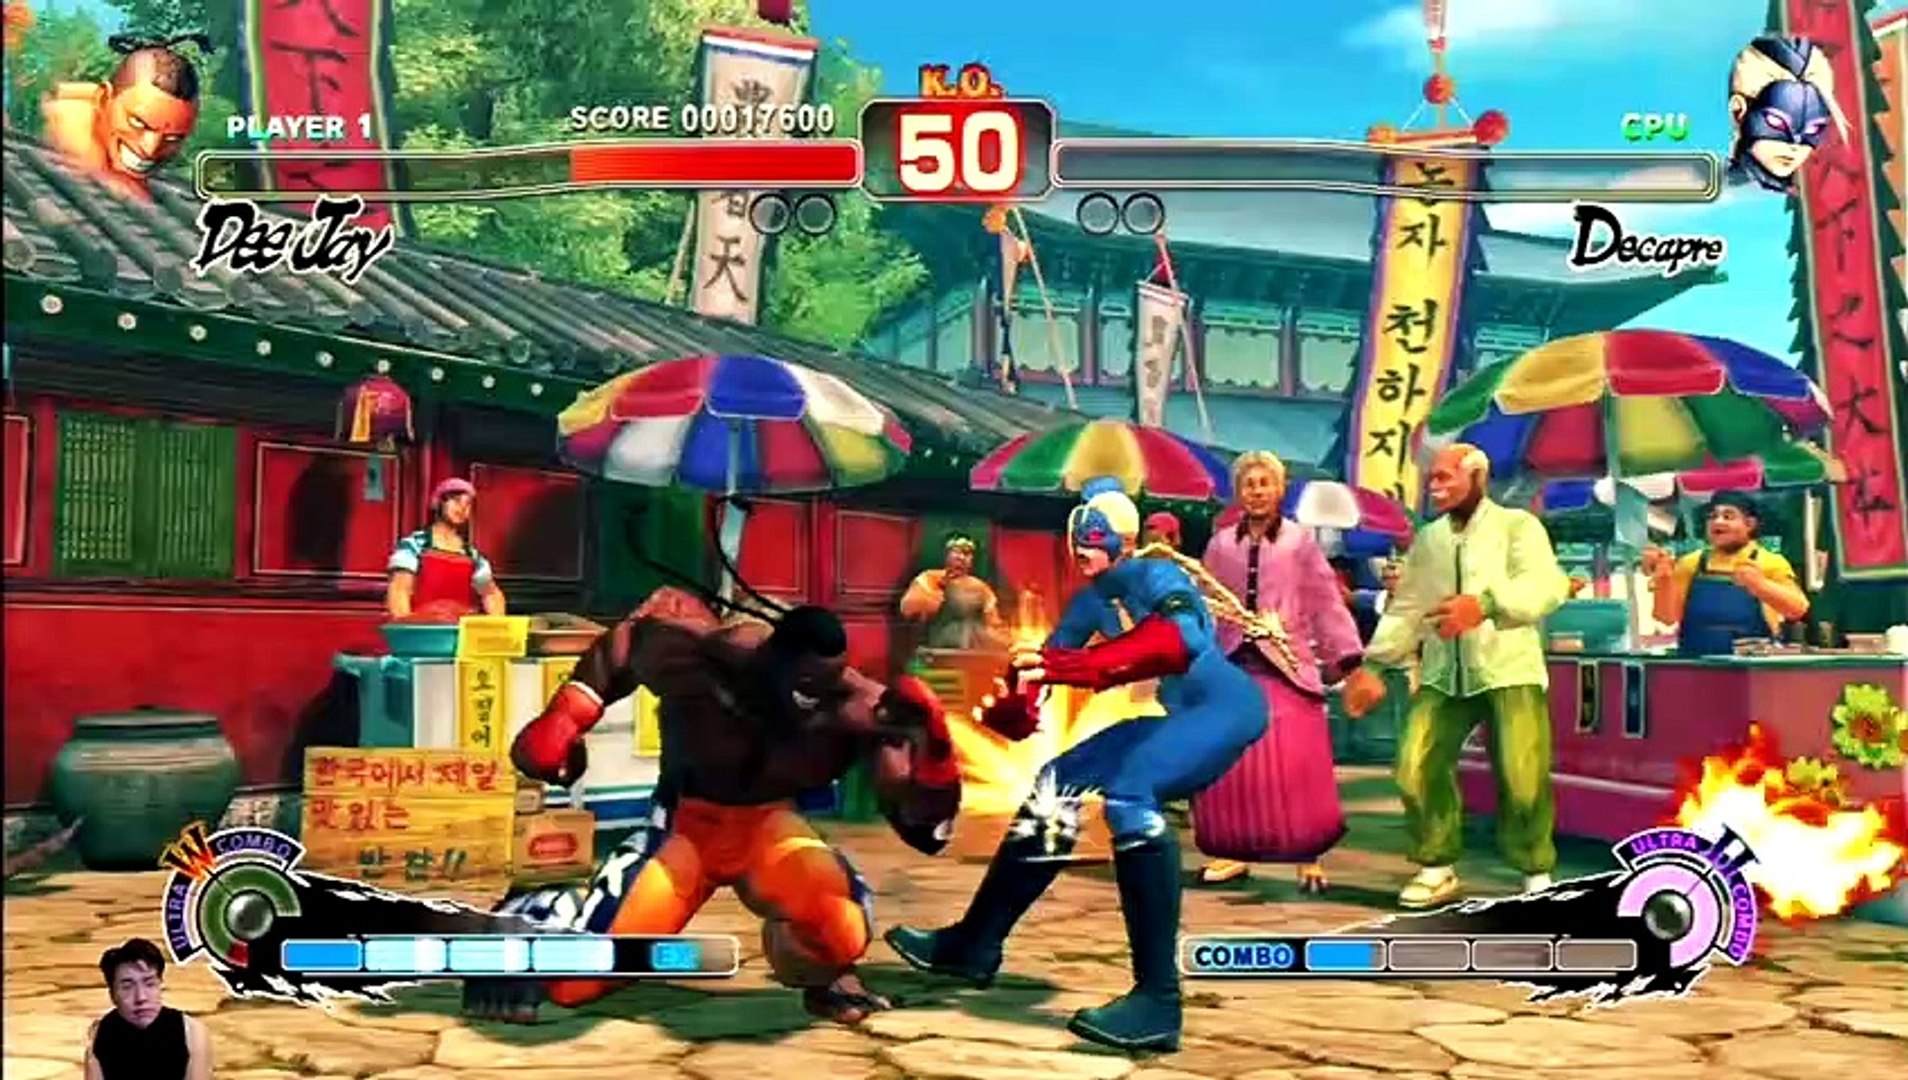 PS3) Ultra Street Fighter 4 - 80 - Dee Jay - Lv Hardest - video Dailymotion